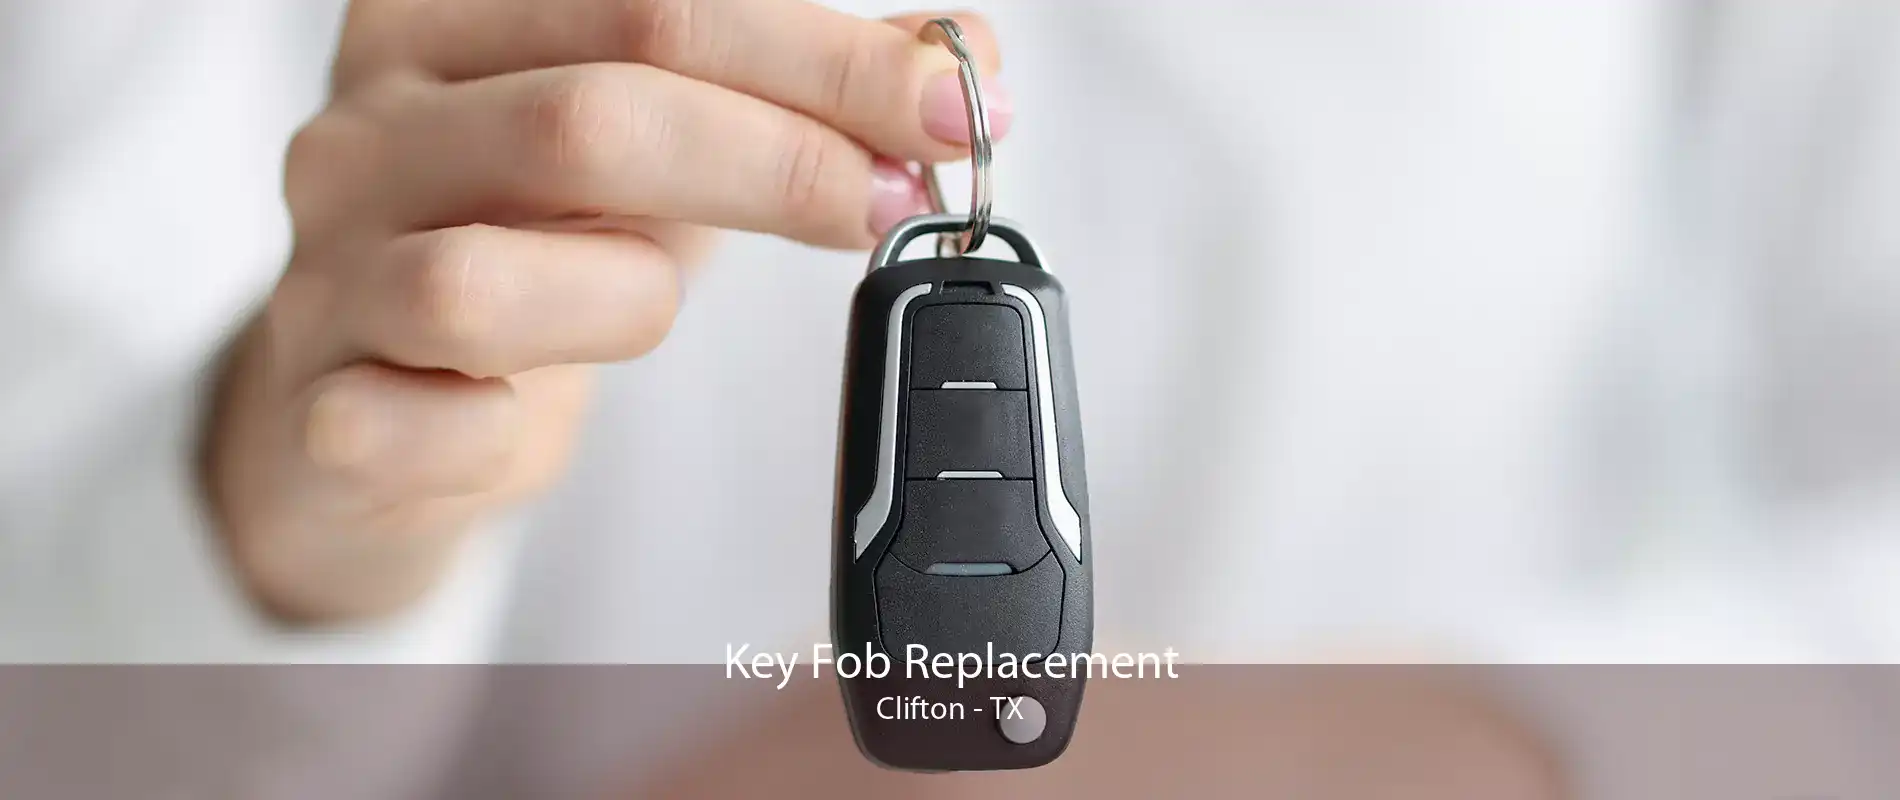 Key Fob Replacement Clifton - TX